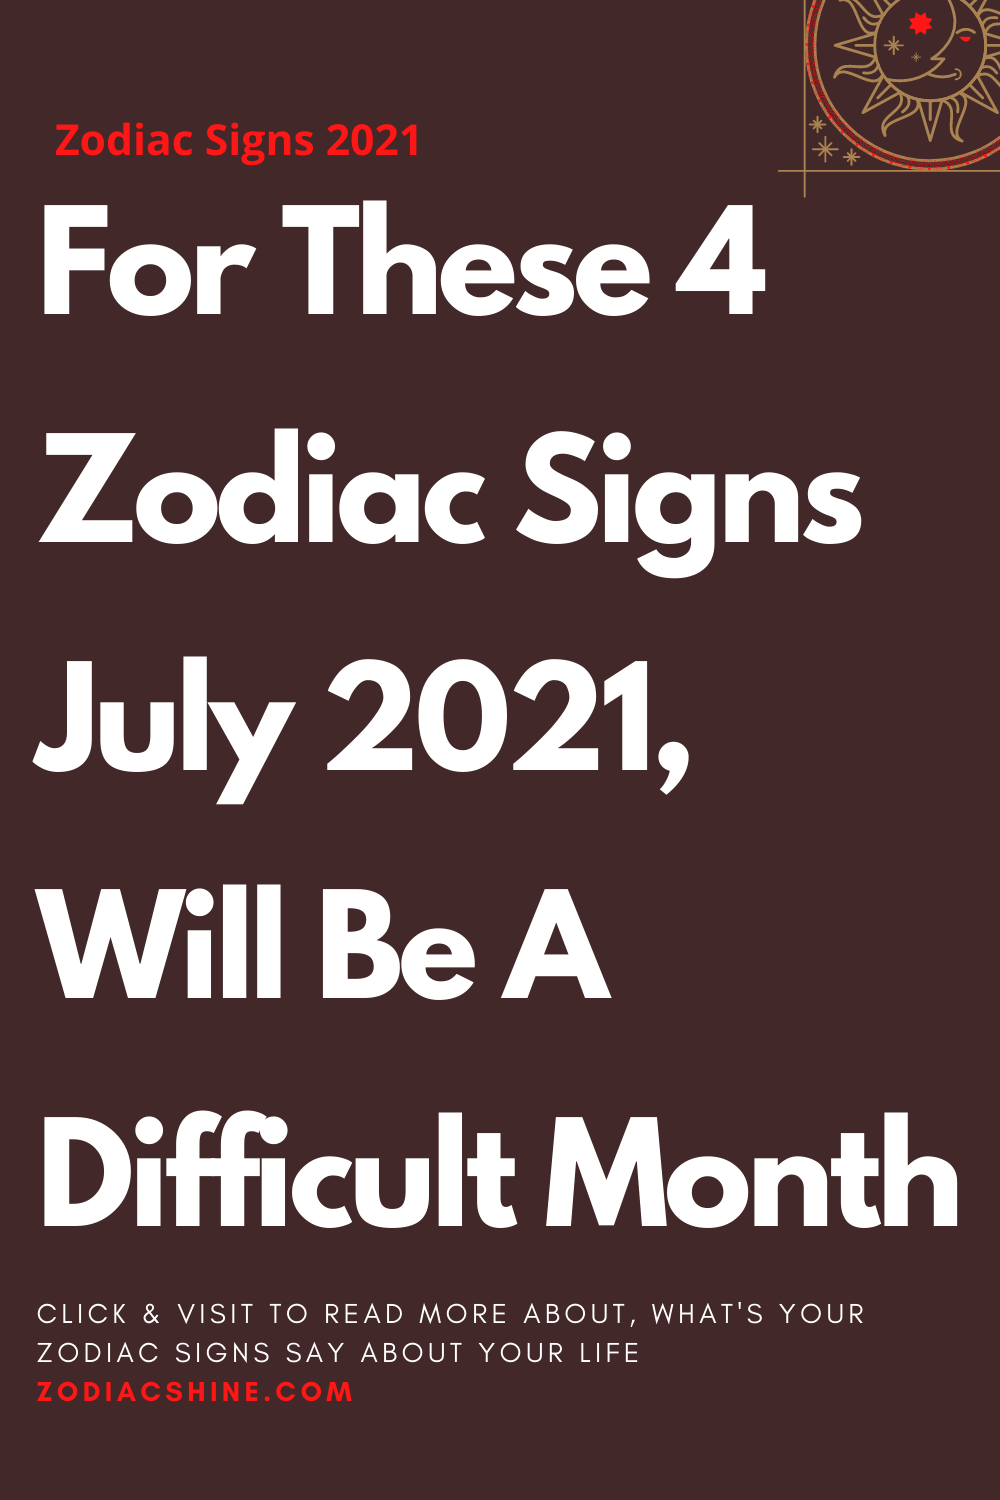 For These 4 Zodiac Signs July 2021, Will Be A Difficult Month